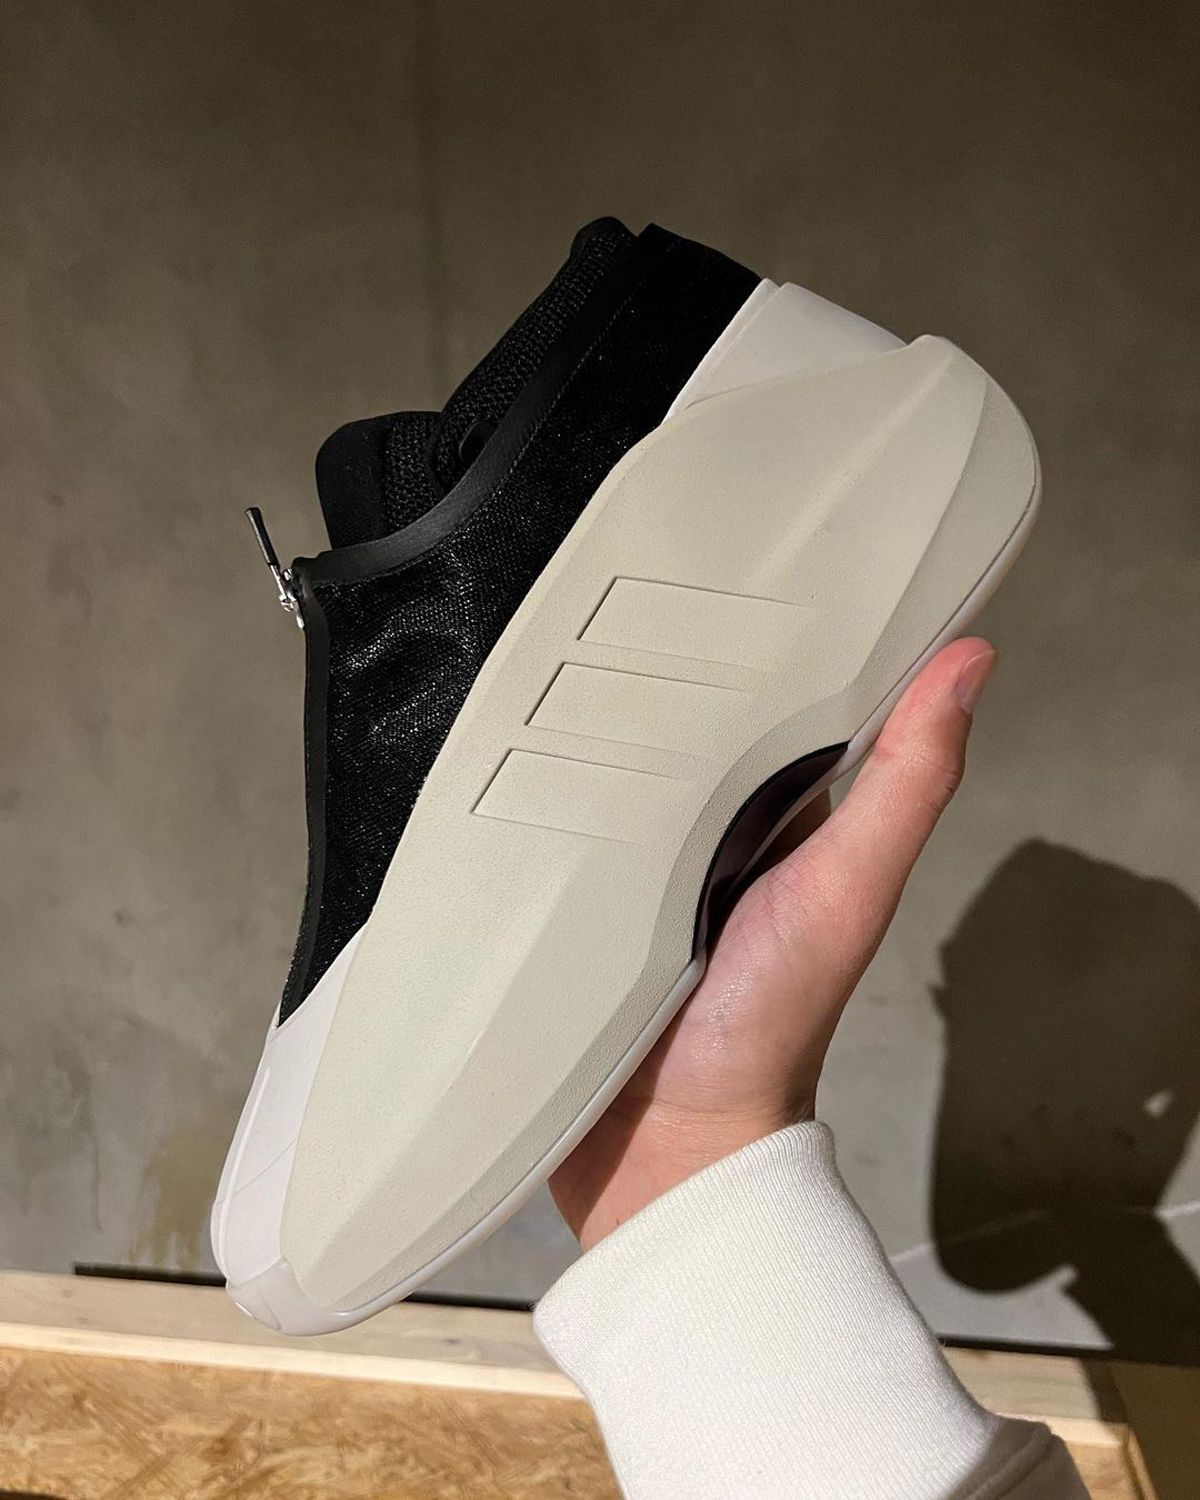 The adidas Crazy Line Enters A New Era In 2023 - Sneaker News